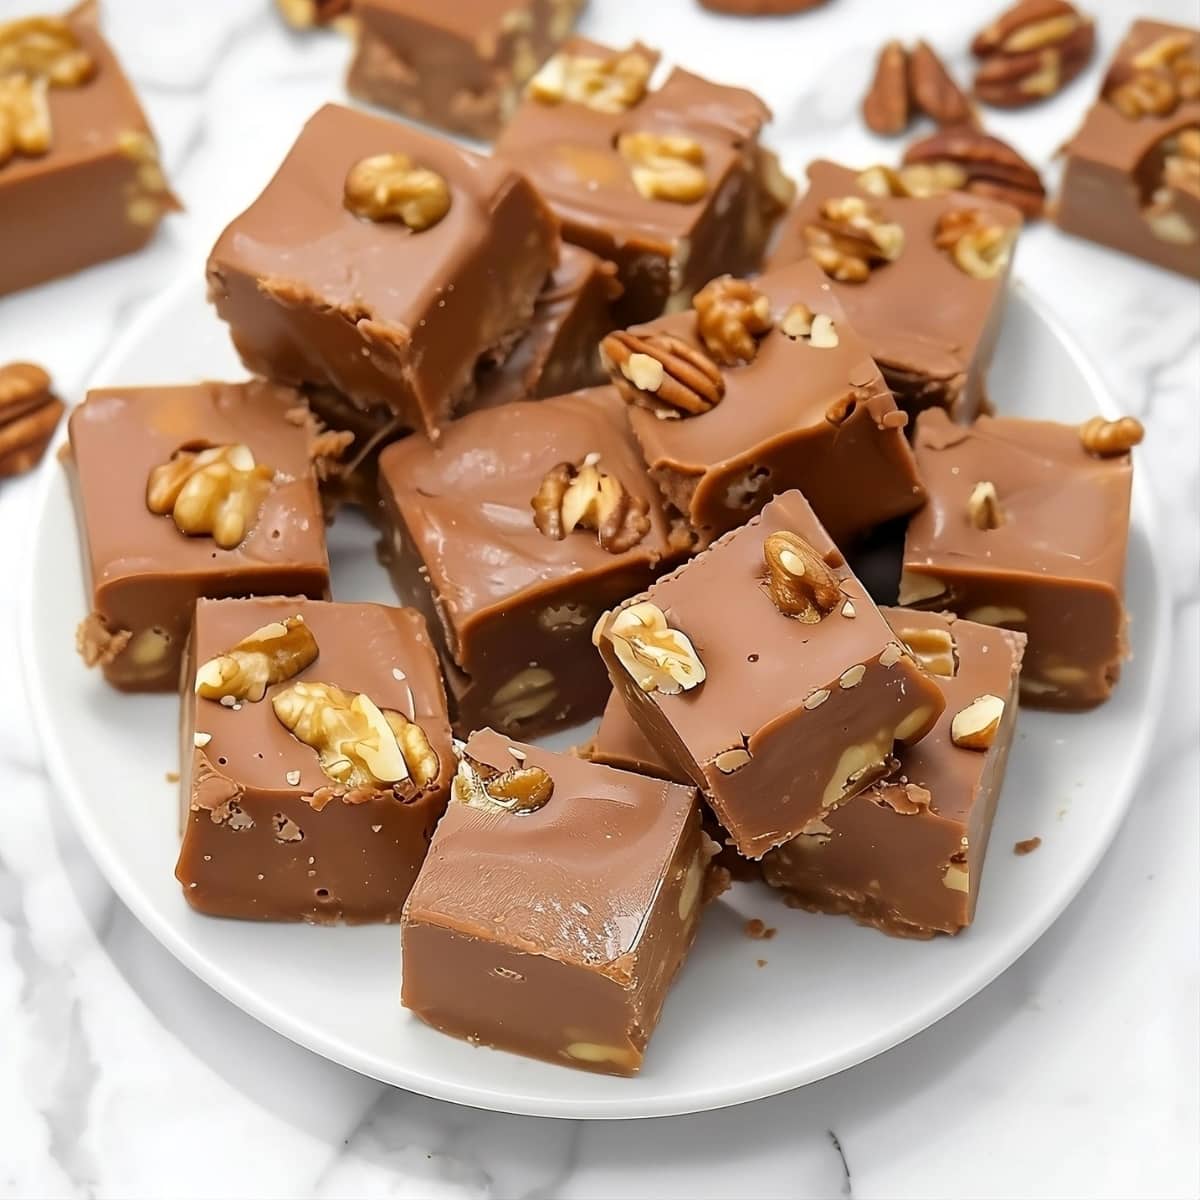 A plate of fudge squares with walnuts